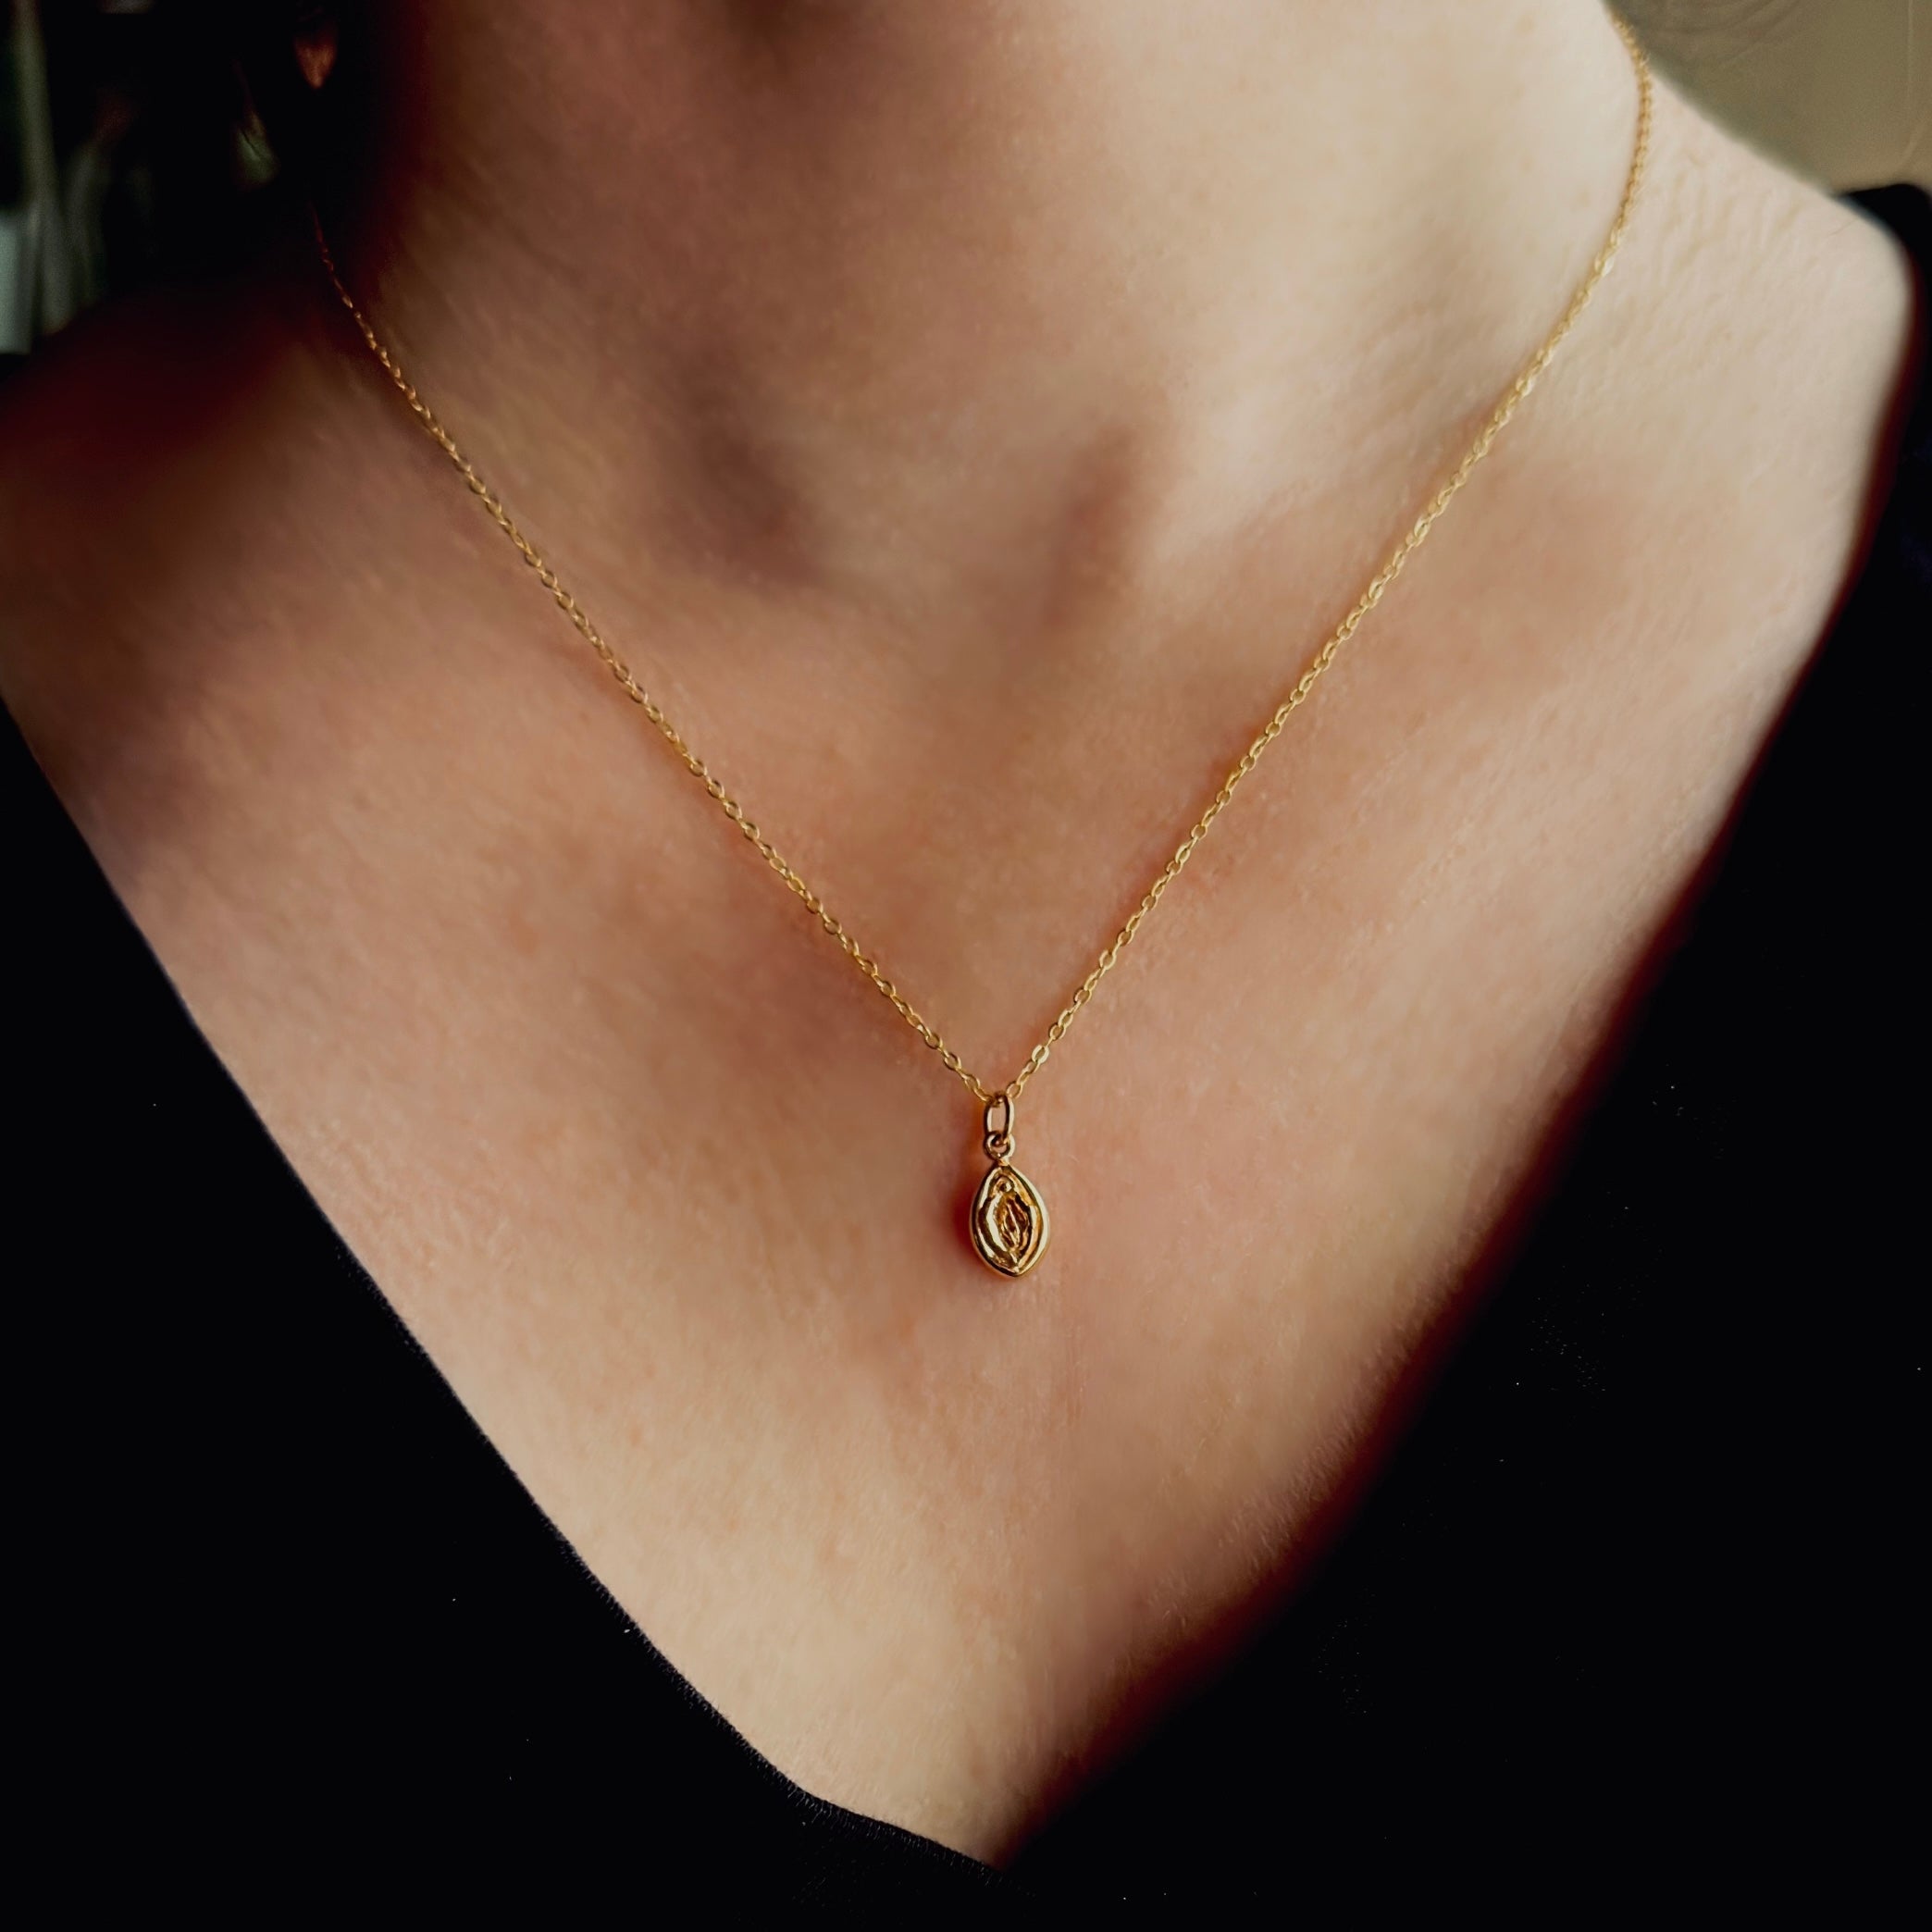 Gold filled necklace with bronze vulva